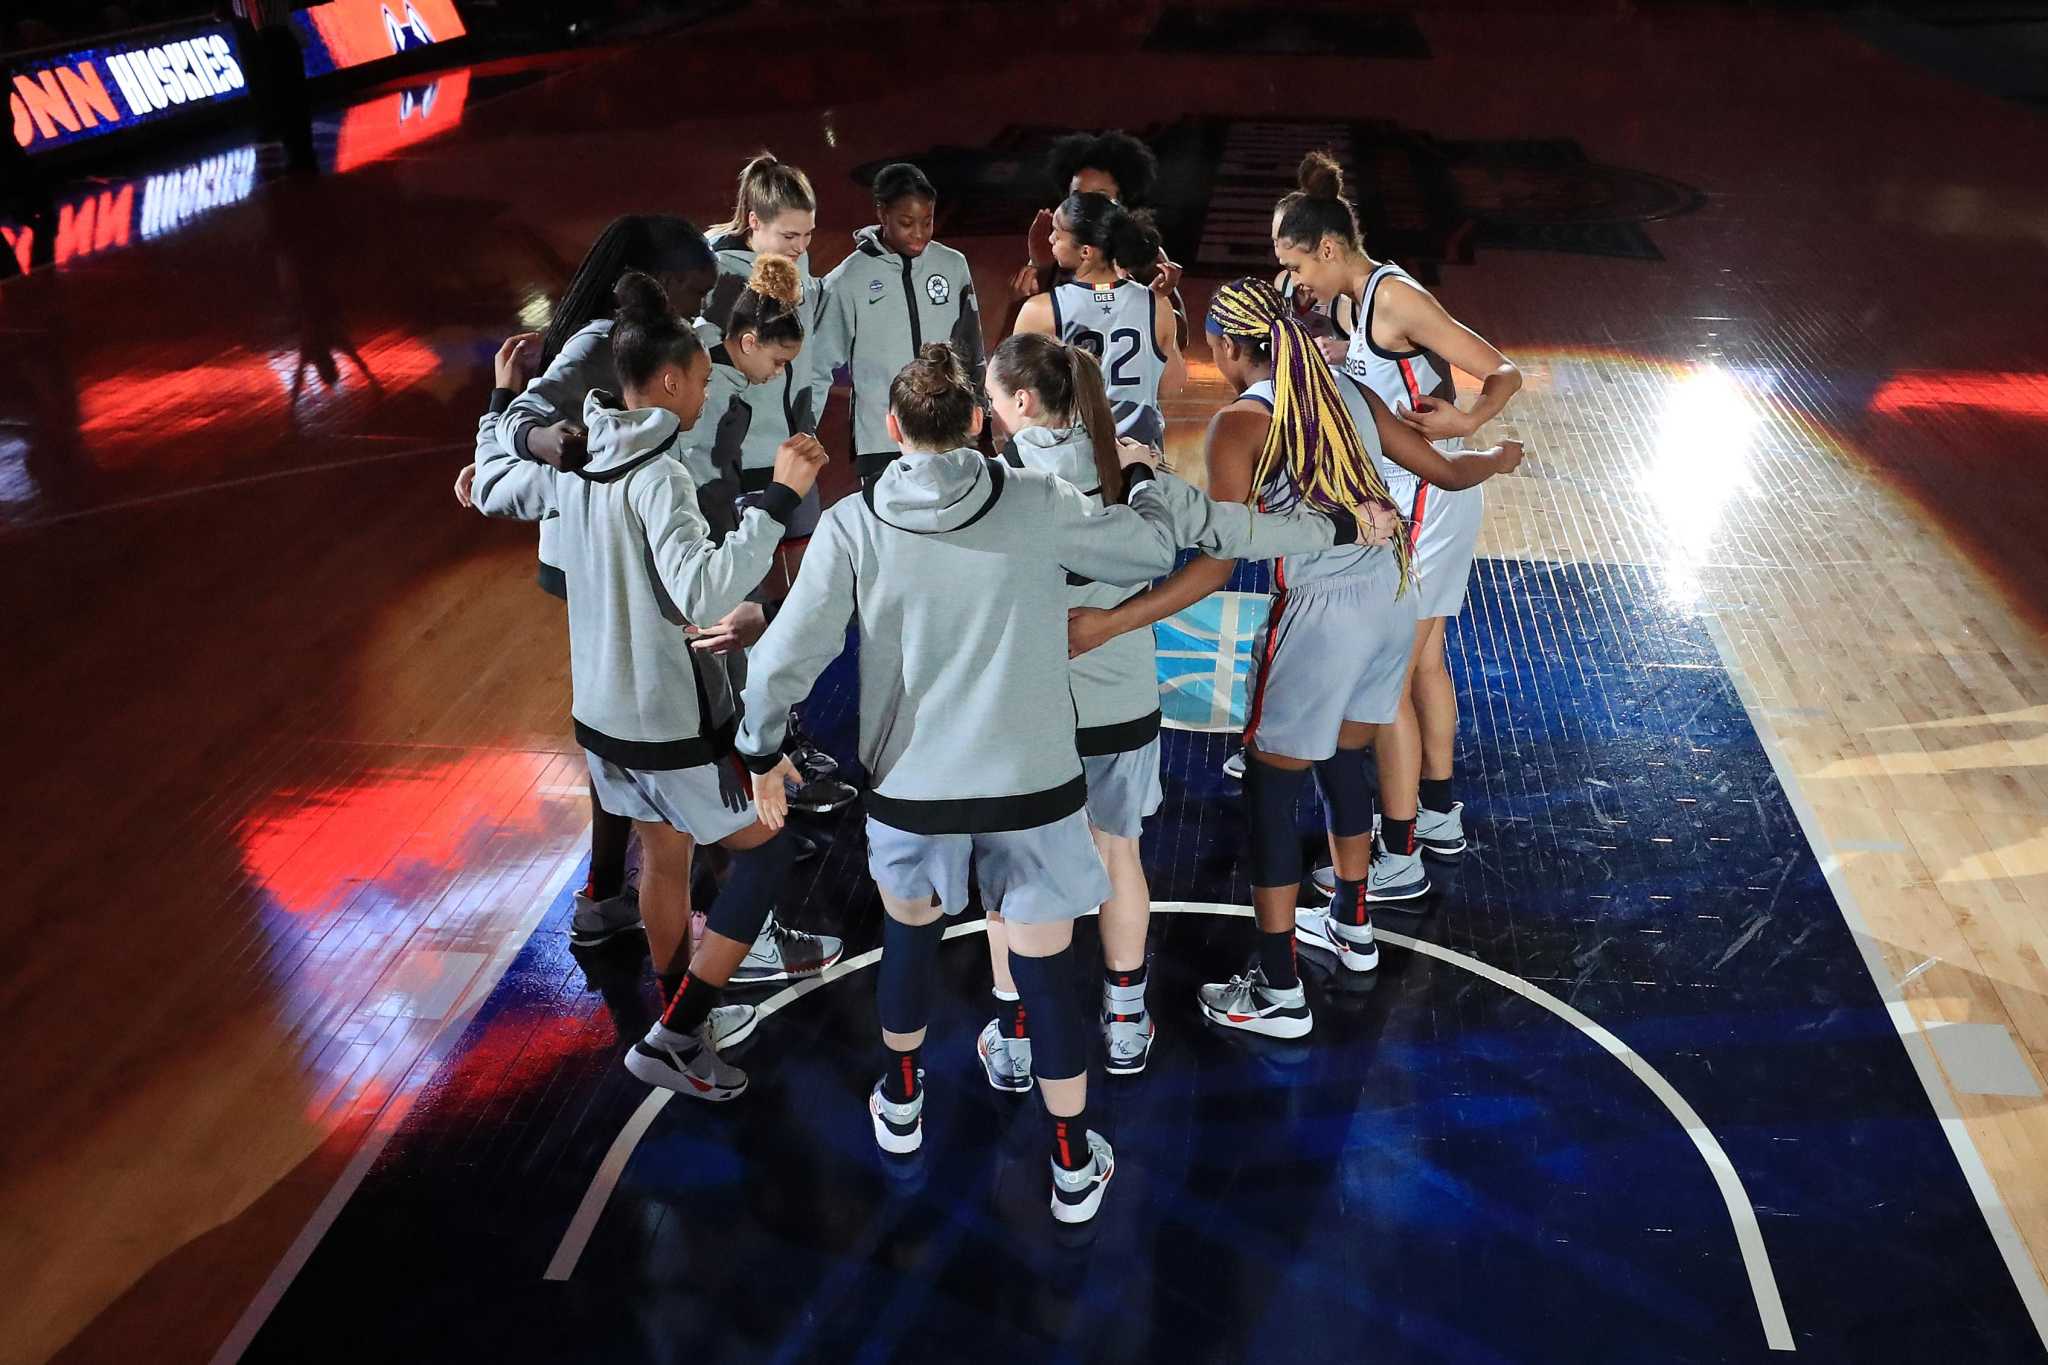 Here's a player-by-player breakdown of the UConn women's 2021-22 roster